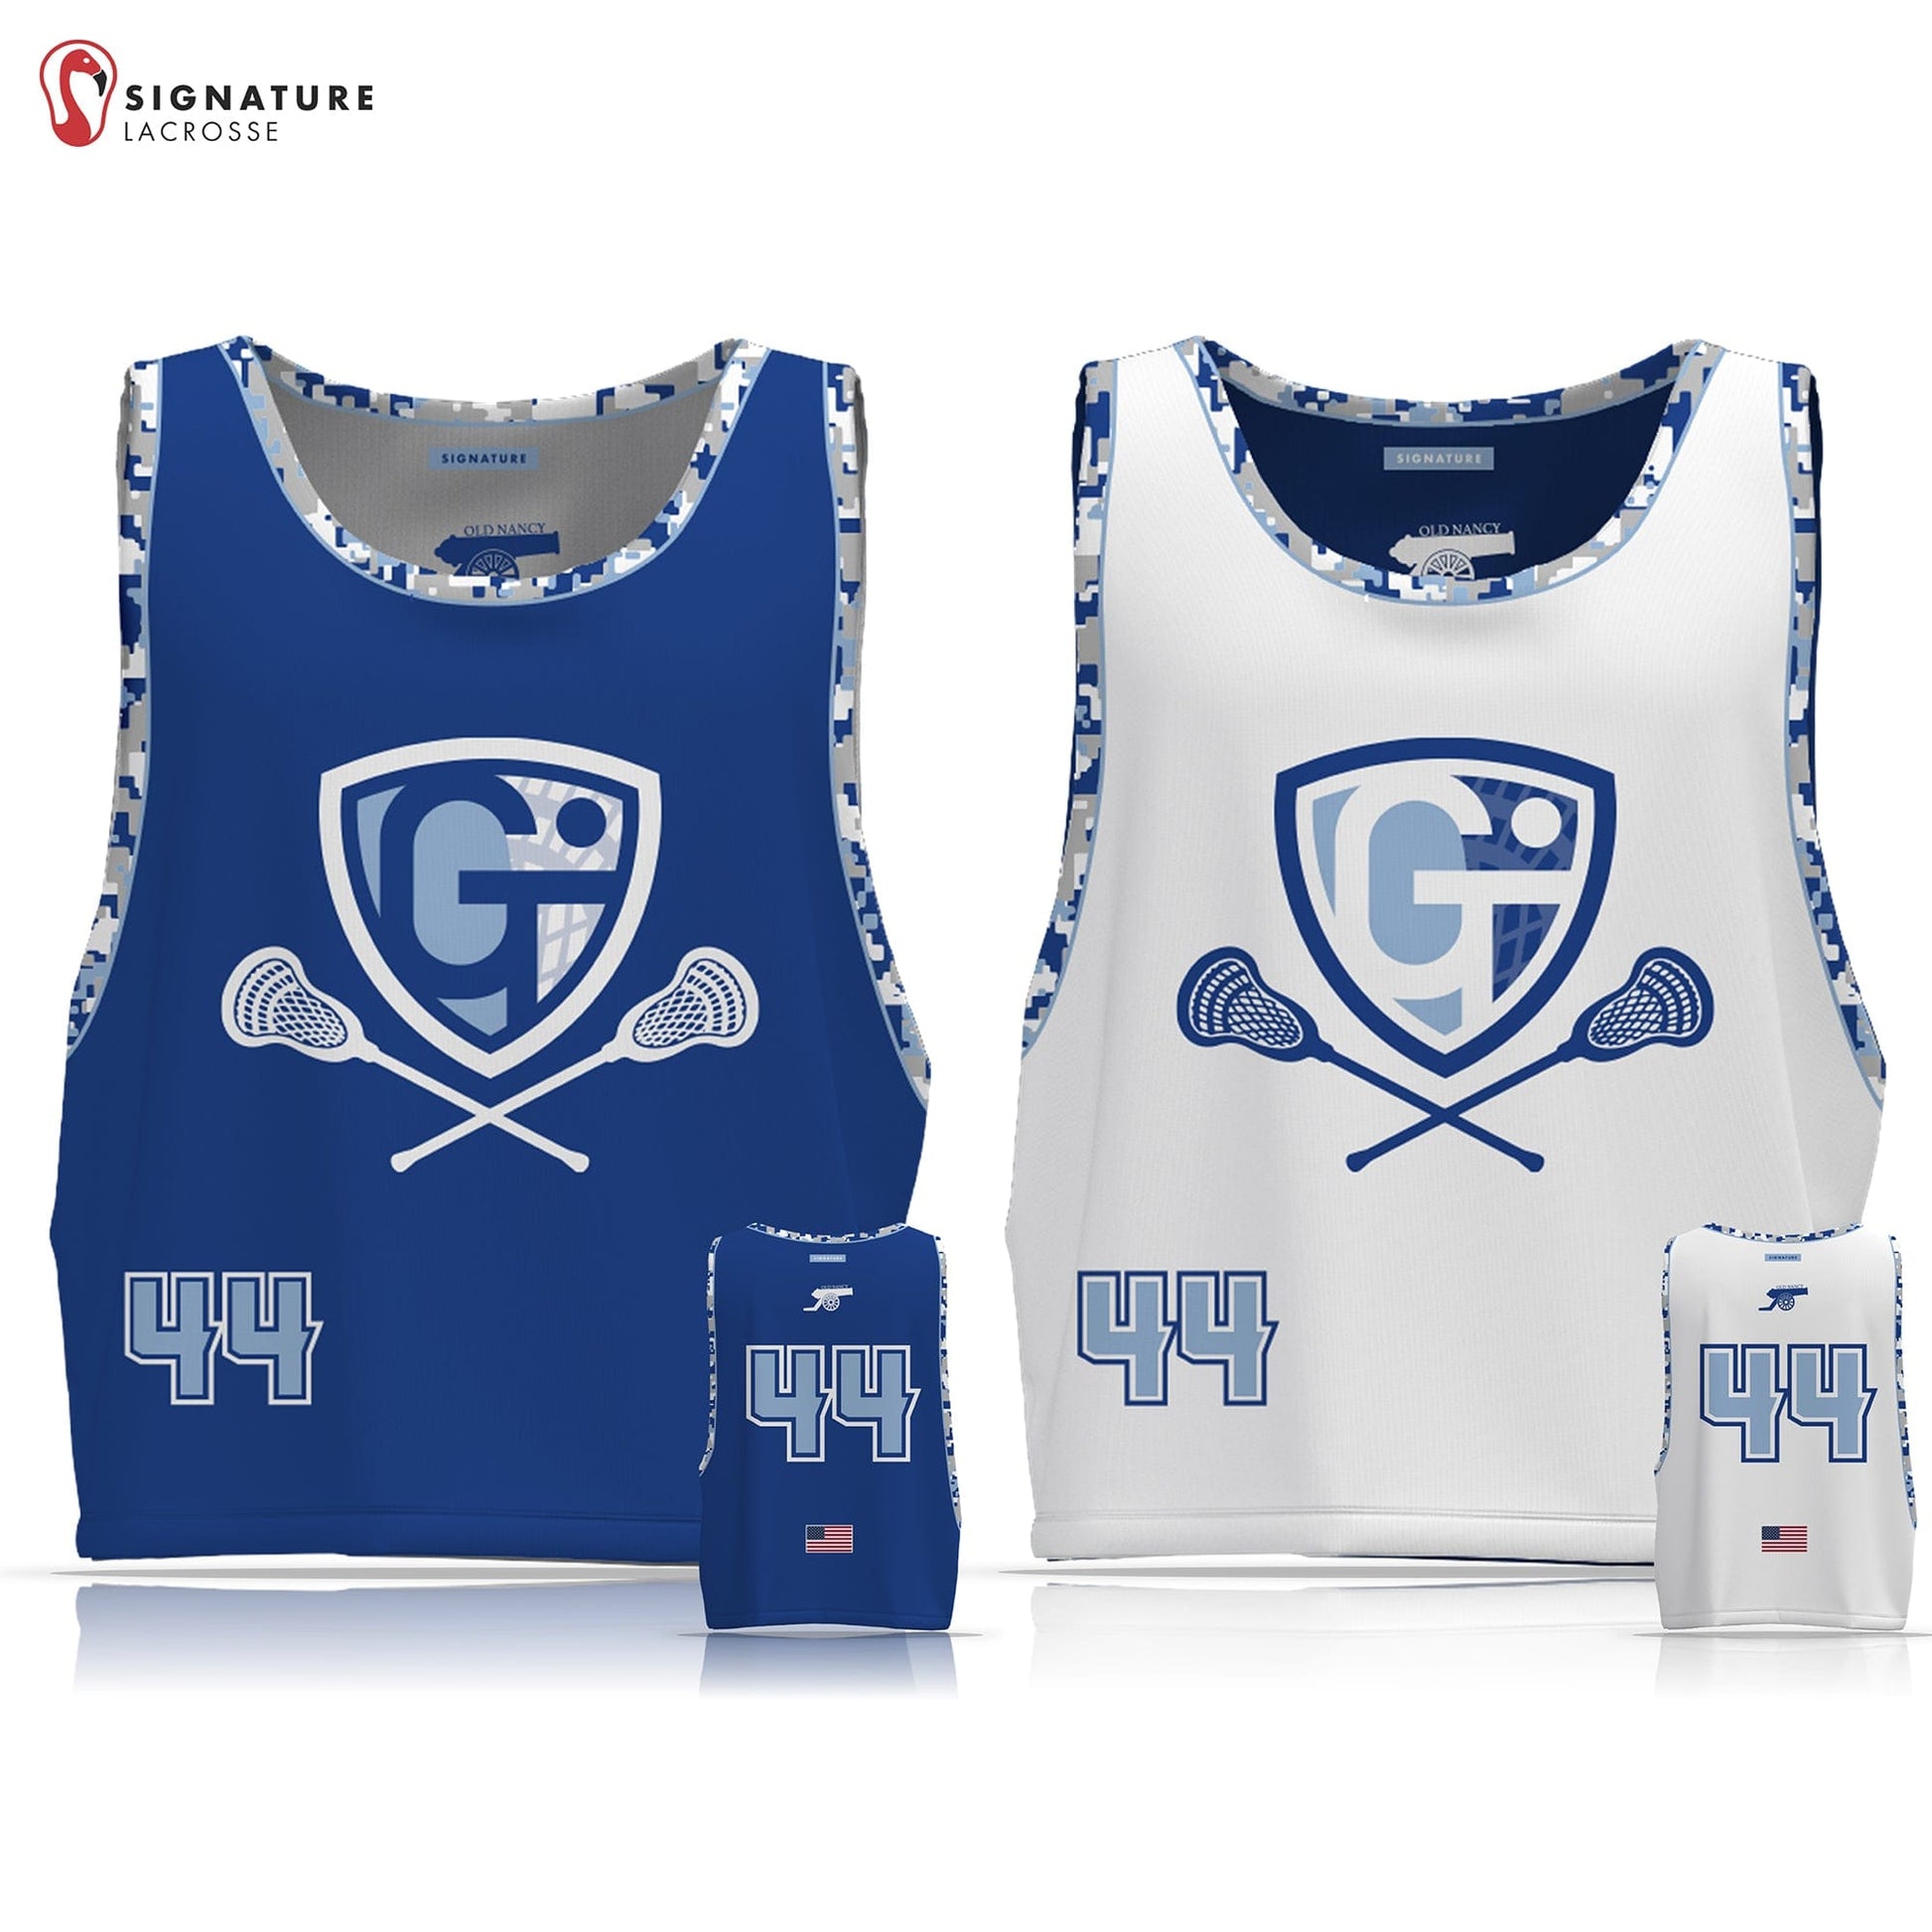 Georgetown-Trition Youth Lacrosse Men's Player Reversible Game Pinnie: 1-2 Signature Lacrosse